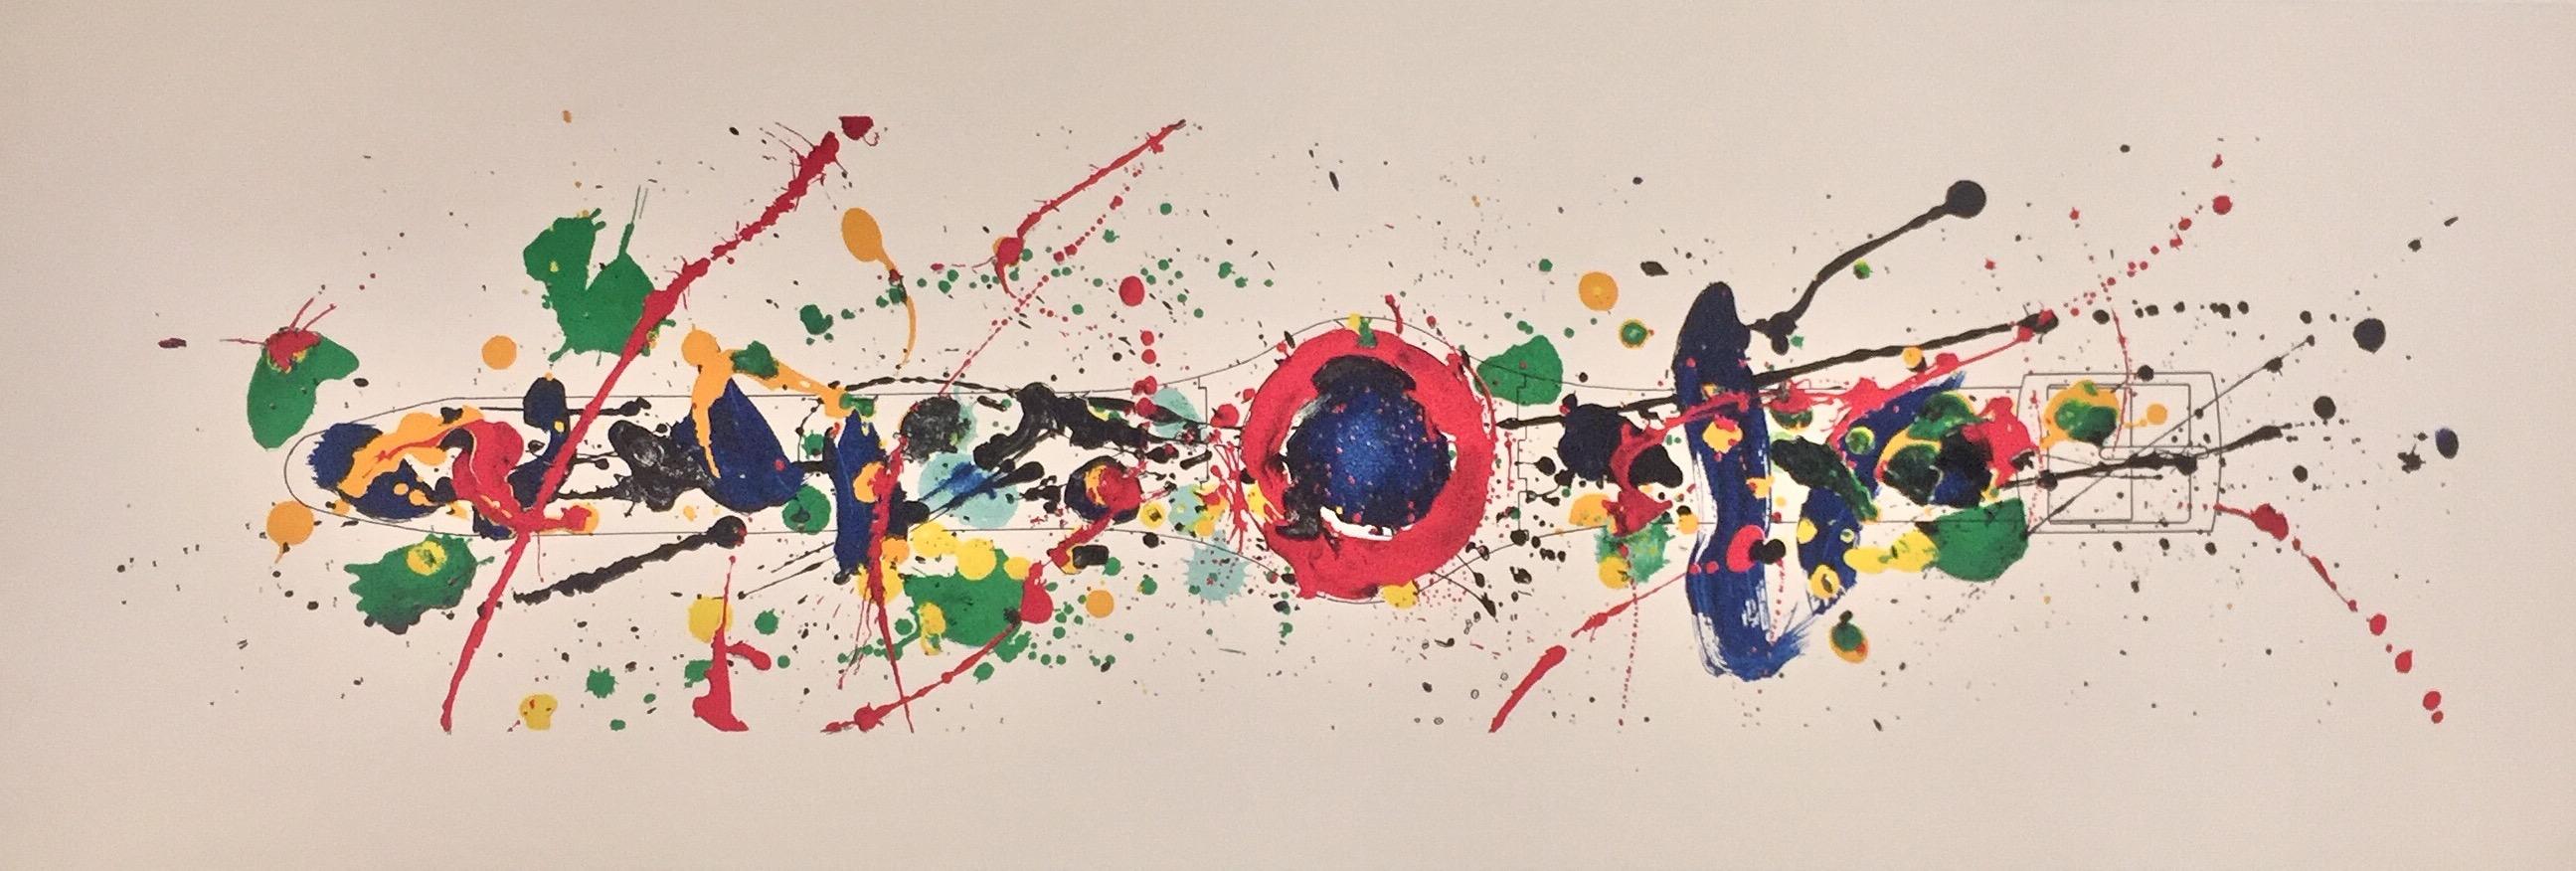 This lithograph by Sam Francis was printed at the Atelier Mourlot in Paris in 1992.  It was a part of an edition of 2,500 and was commissioned by the watch company Swatch. 

Francis was an American artist known for his exuberantly colorful,